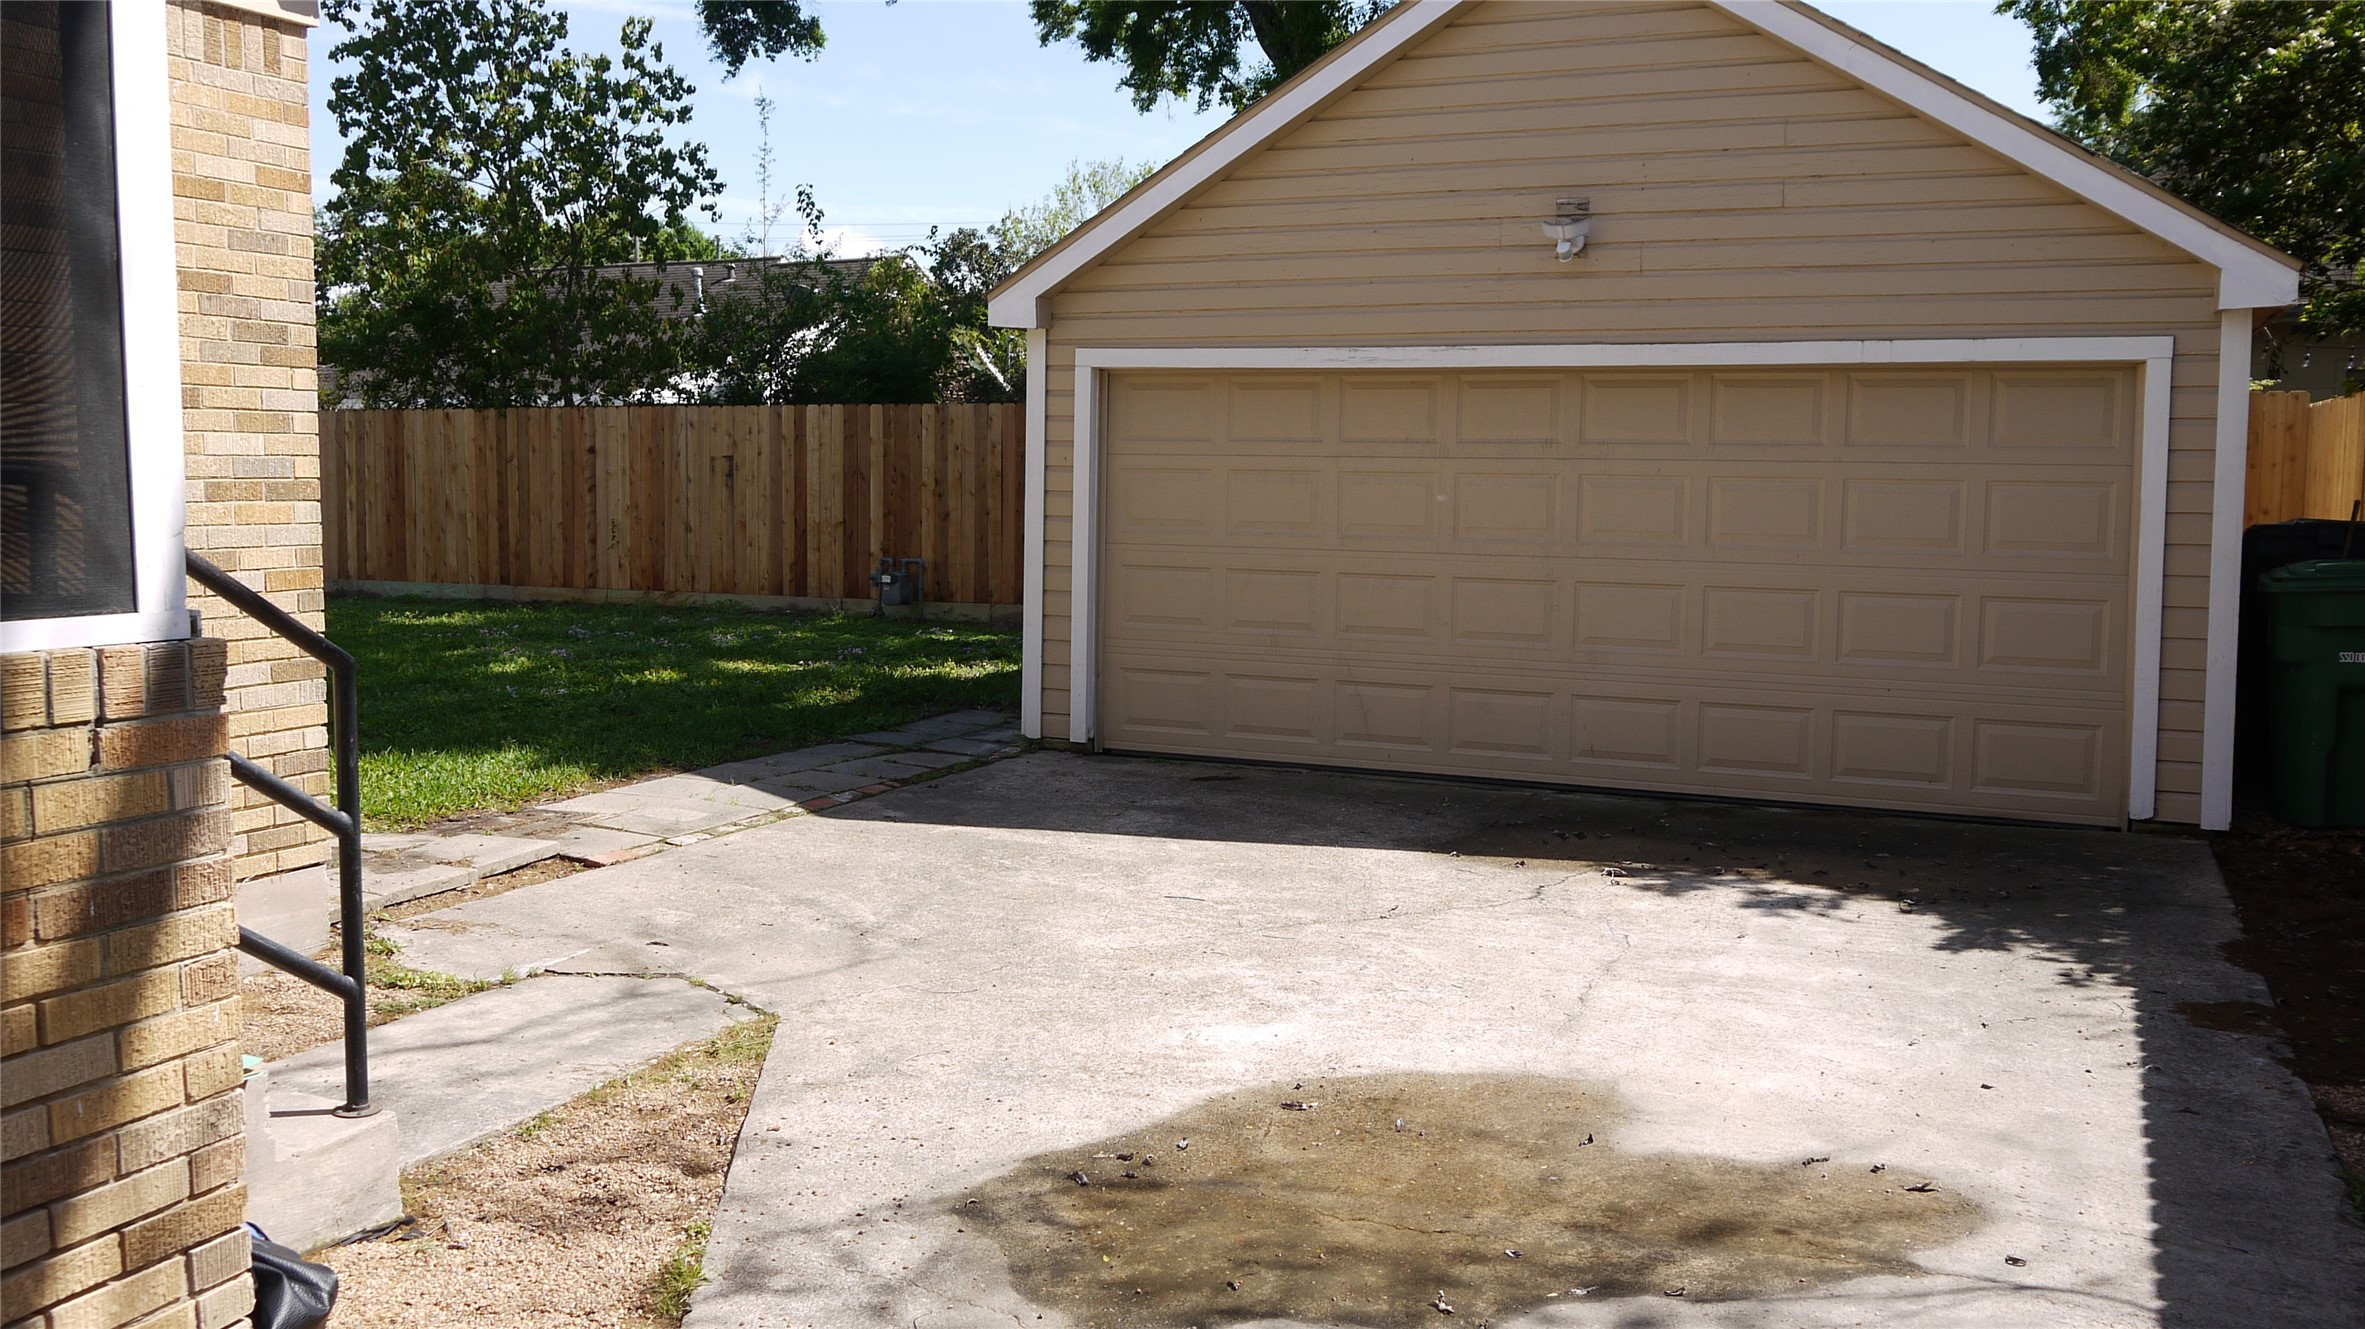 2 car detached garage.  Your washer and dryer connections are located in the garage!